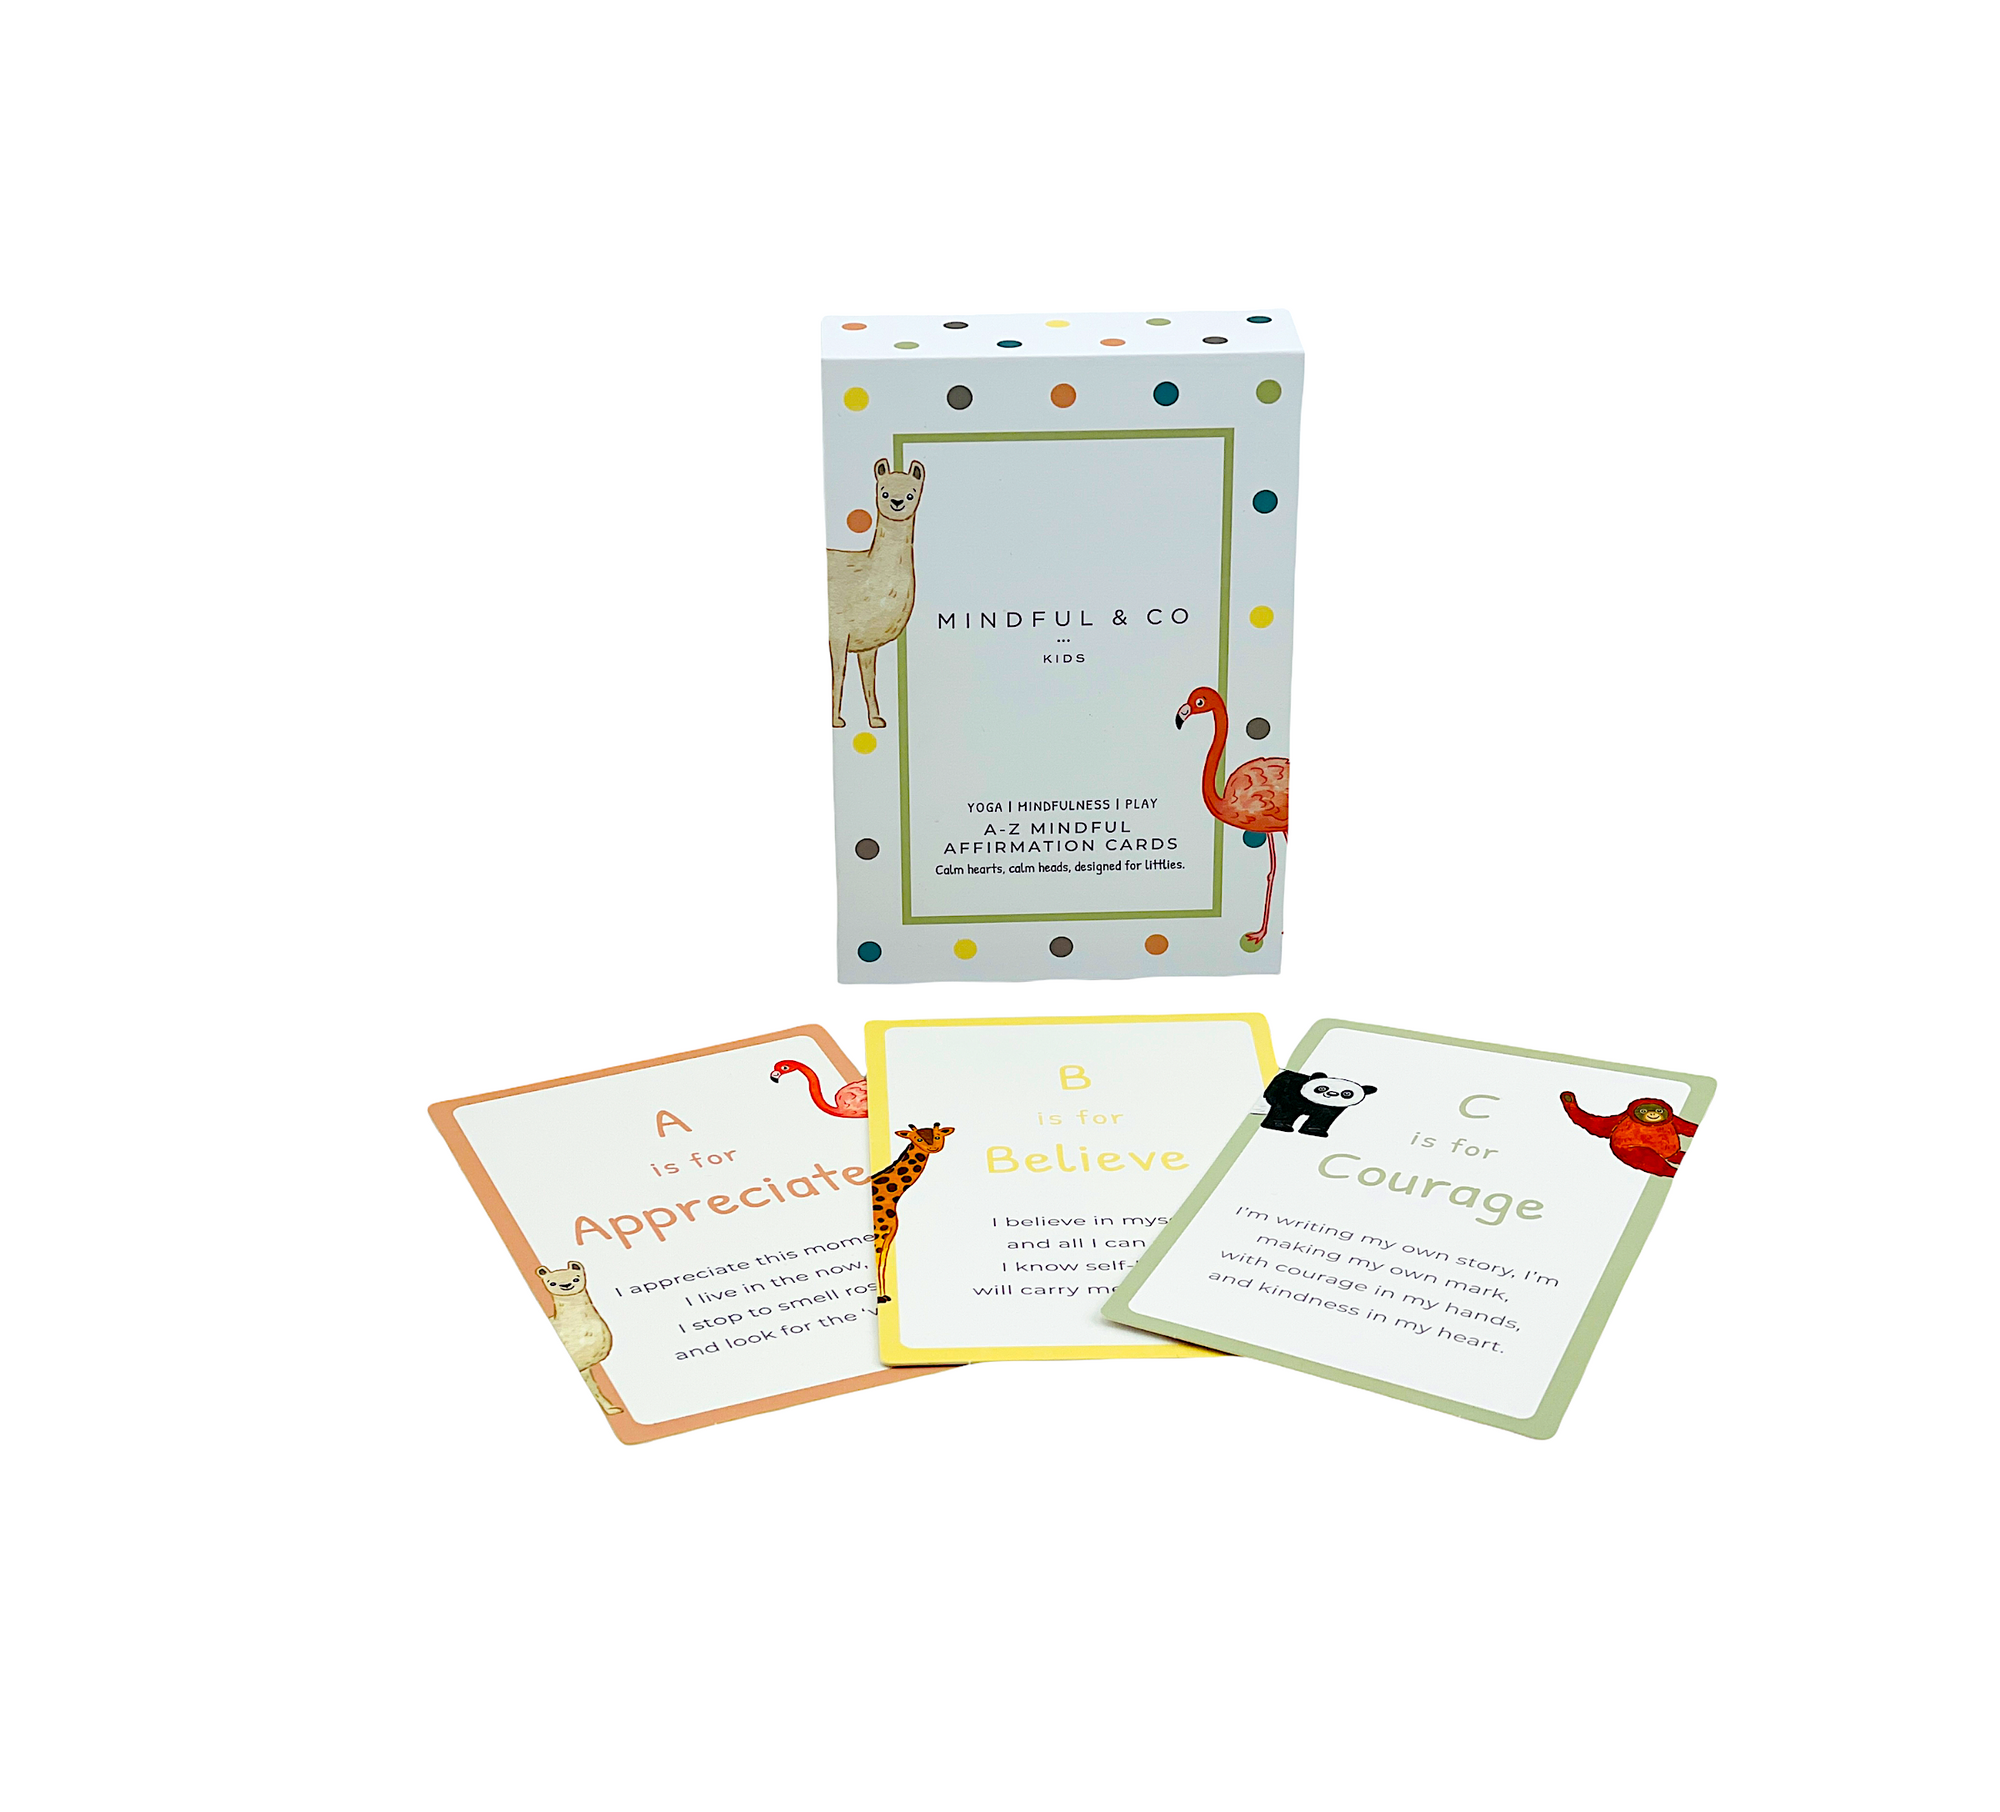 The Mindful & Co A - Z Mindful Affirmation Cards on display with 3 affirmation cards in front of white box